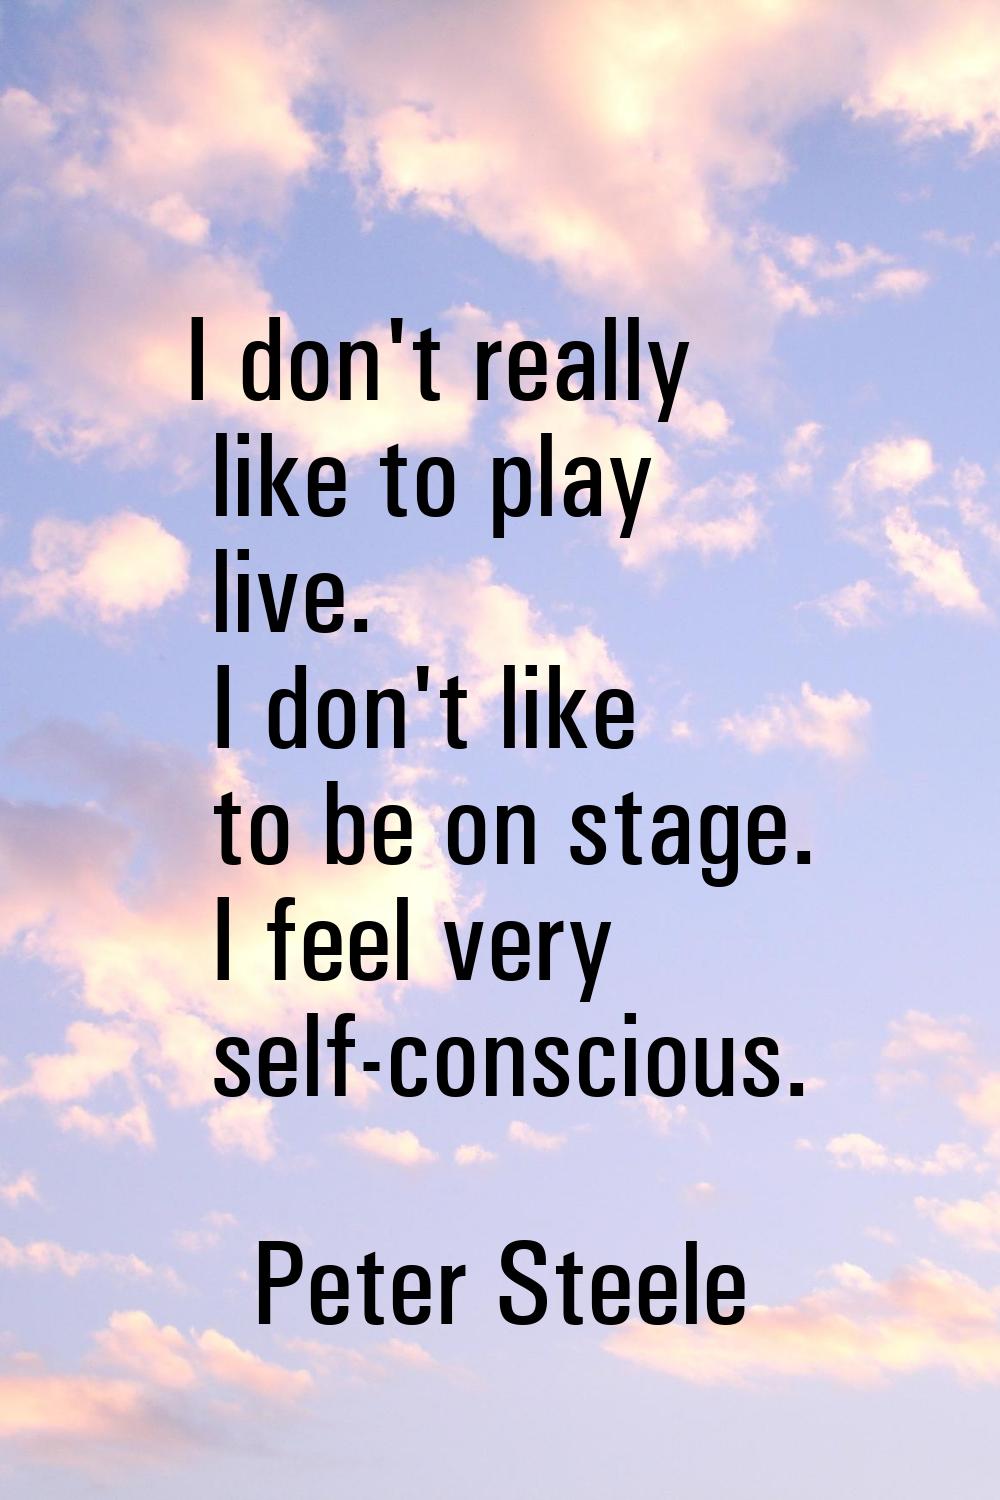 I don't really like to play live. I don't like to be on stage. I feel very self-conscious.